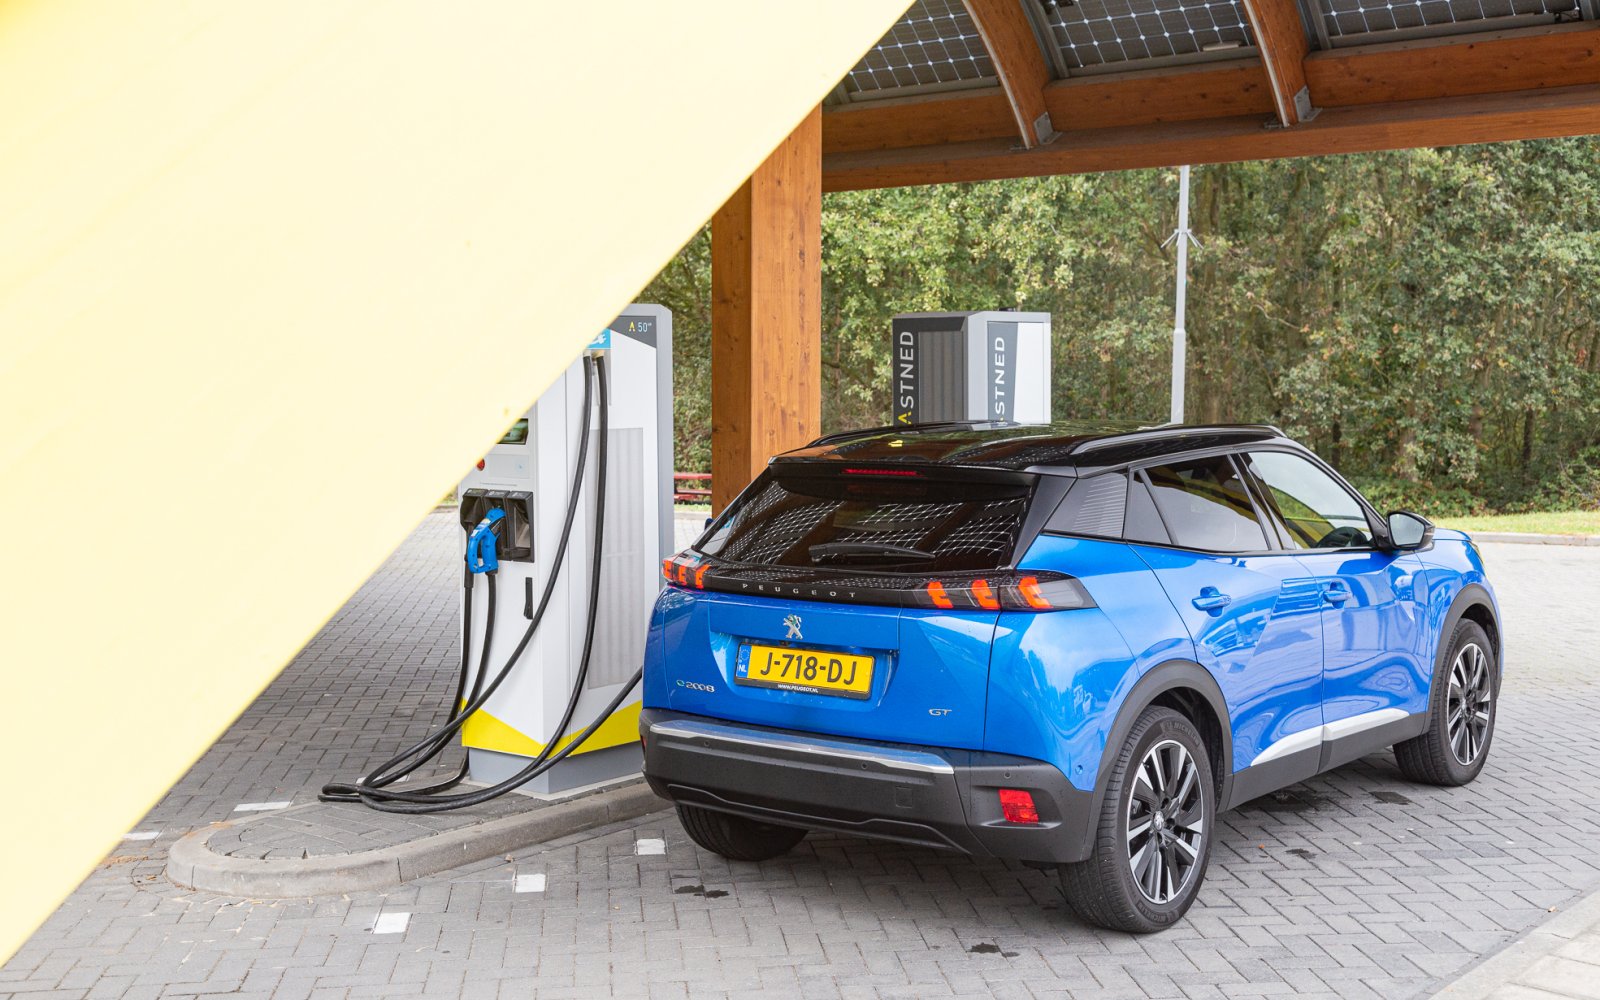 Top 10 - These electric cars came the furthest in our range test